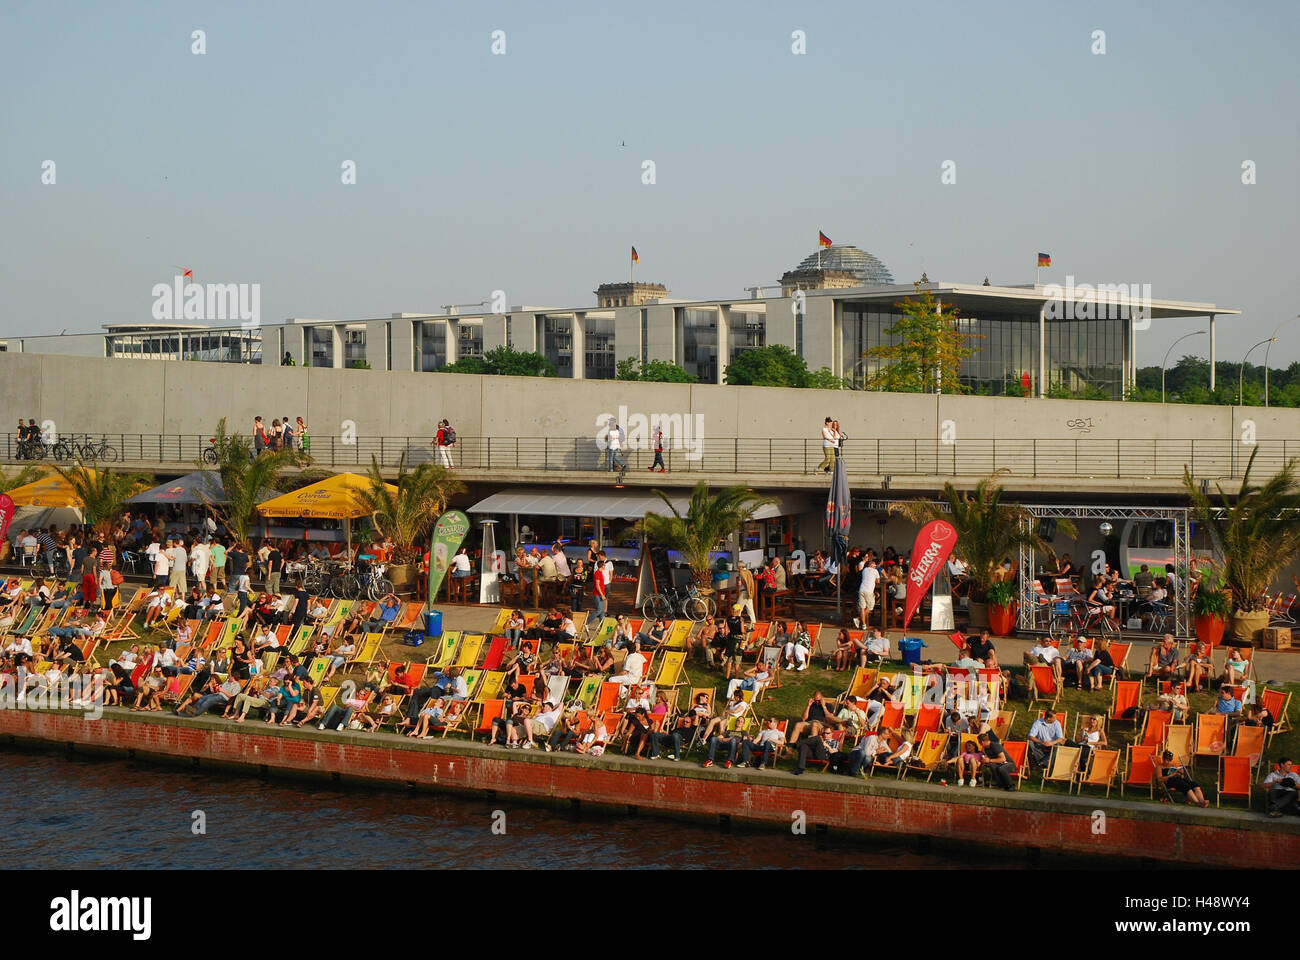 Germany, Berlin, Spree bow, beach cafe, deck chairs, people, town, capital, the Spree, river, riverside, summer, solar bath, guests, tourists, sun benches, take it easy, recreation, rest, leisure time, Reichstag dome, Stock Photo